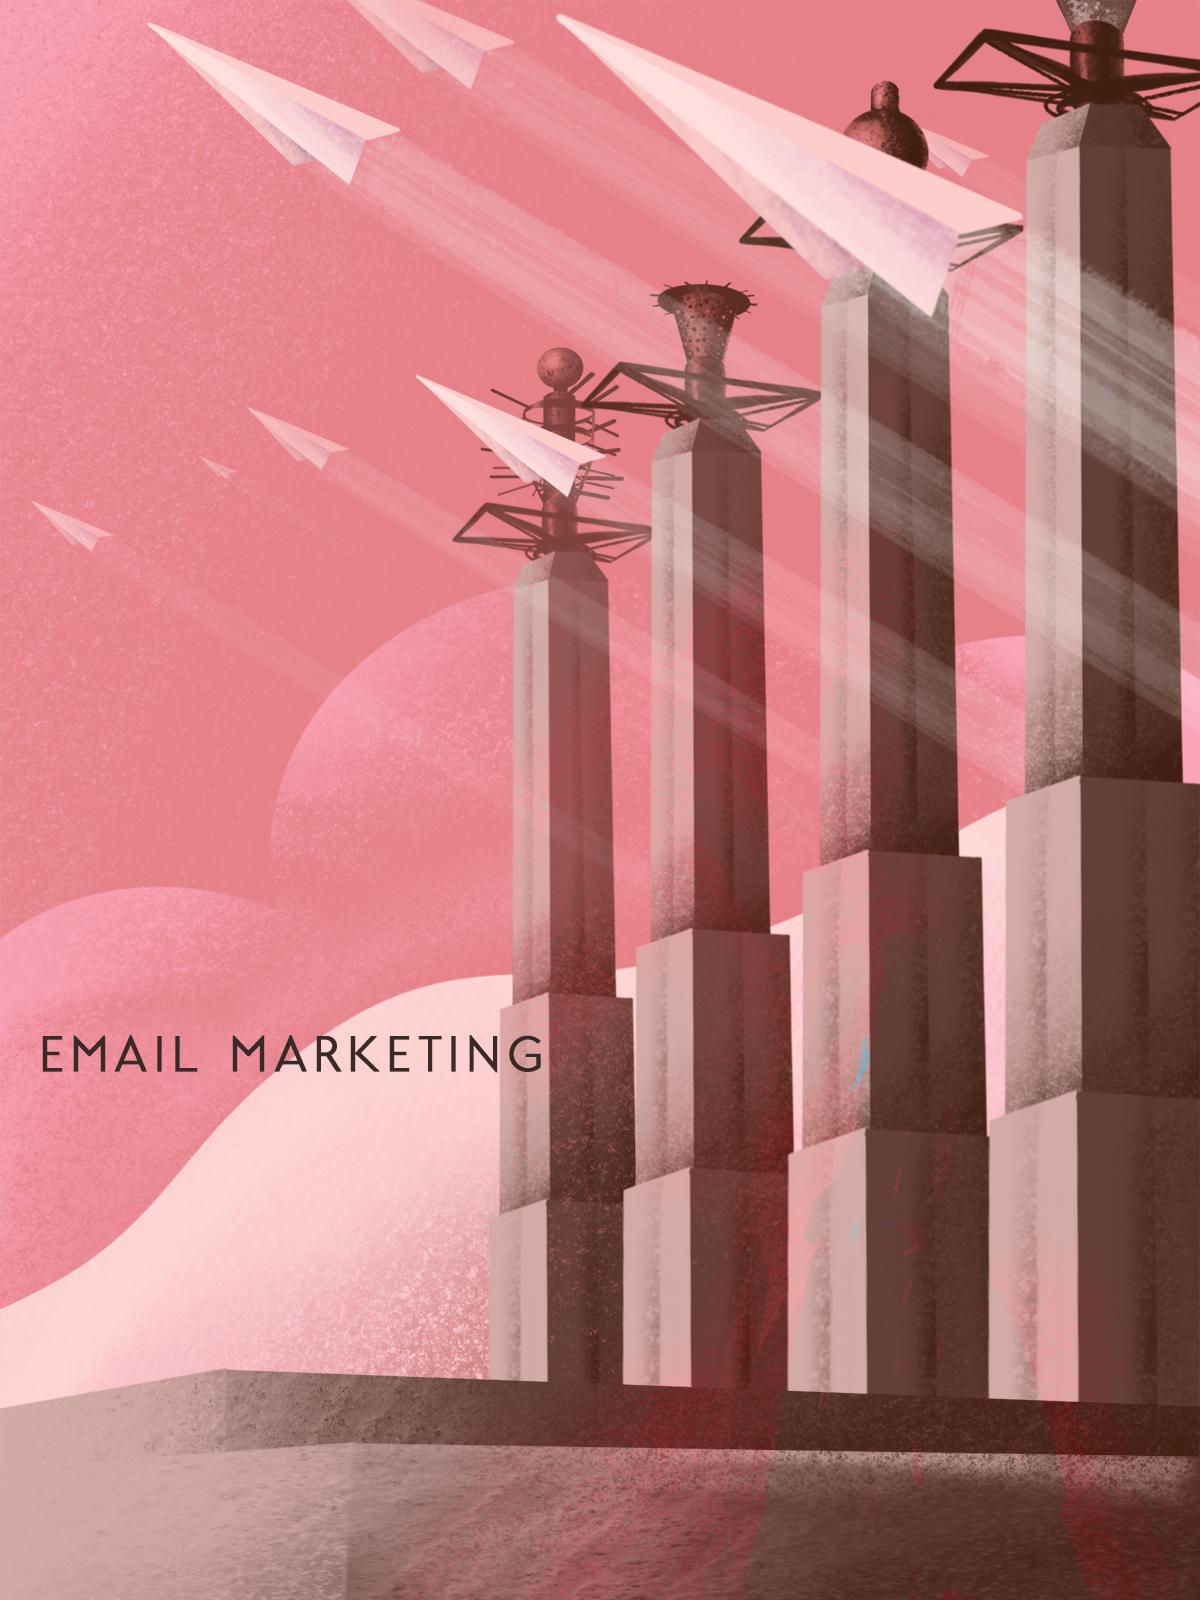 Email Marketing poster